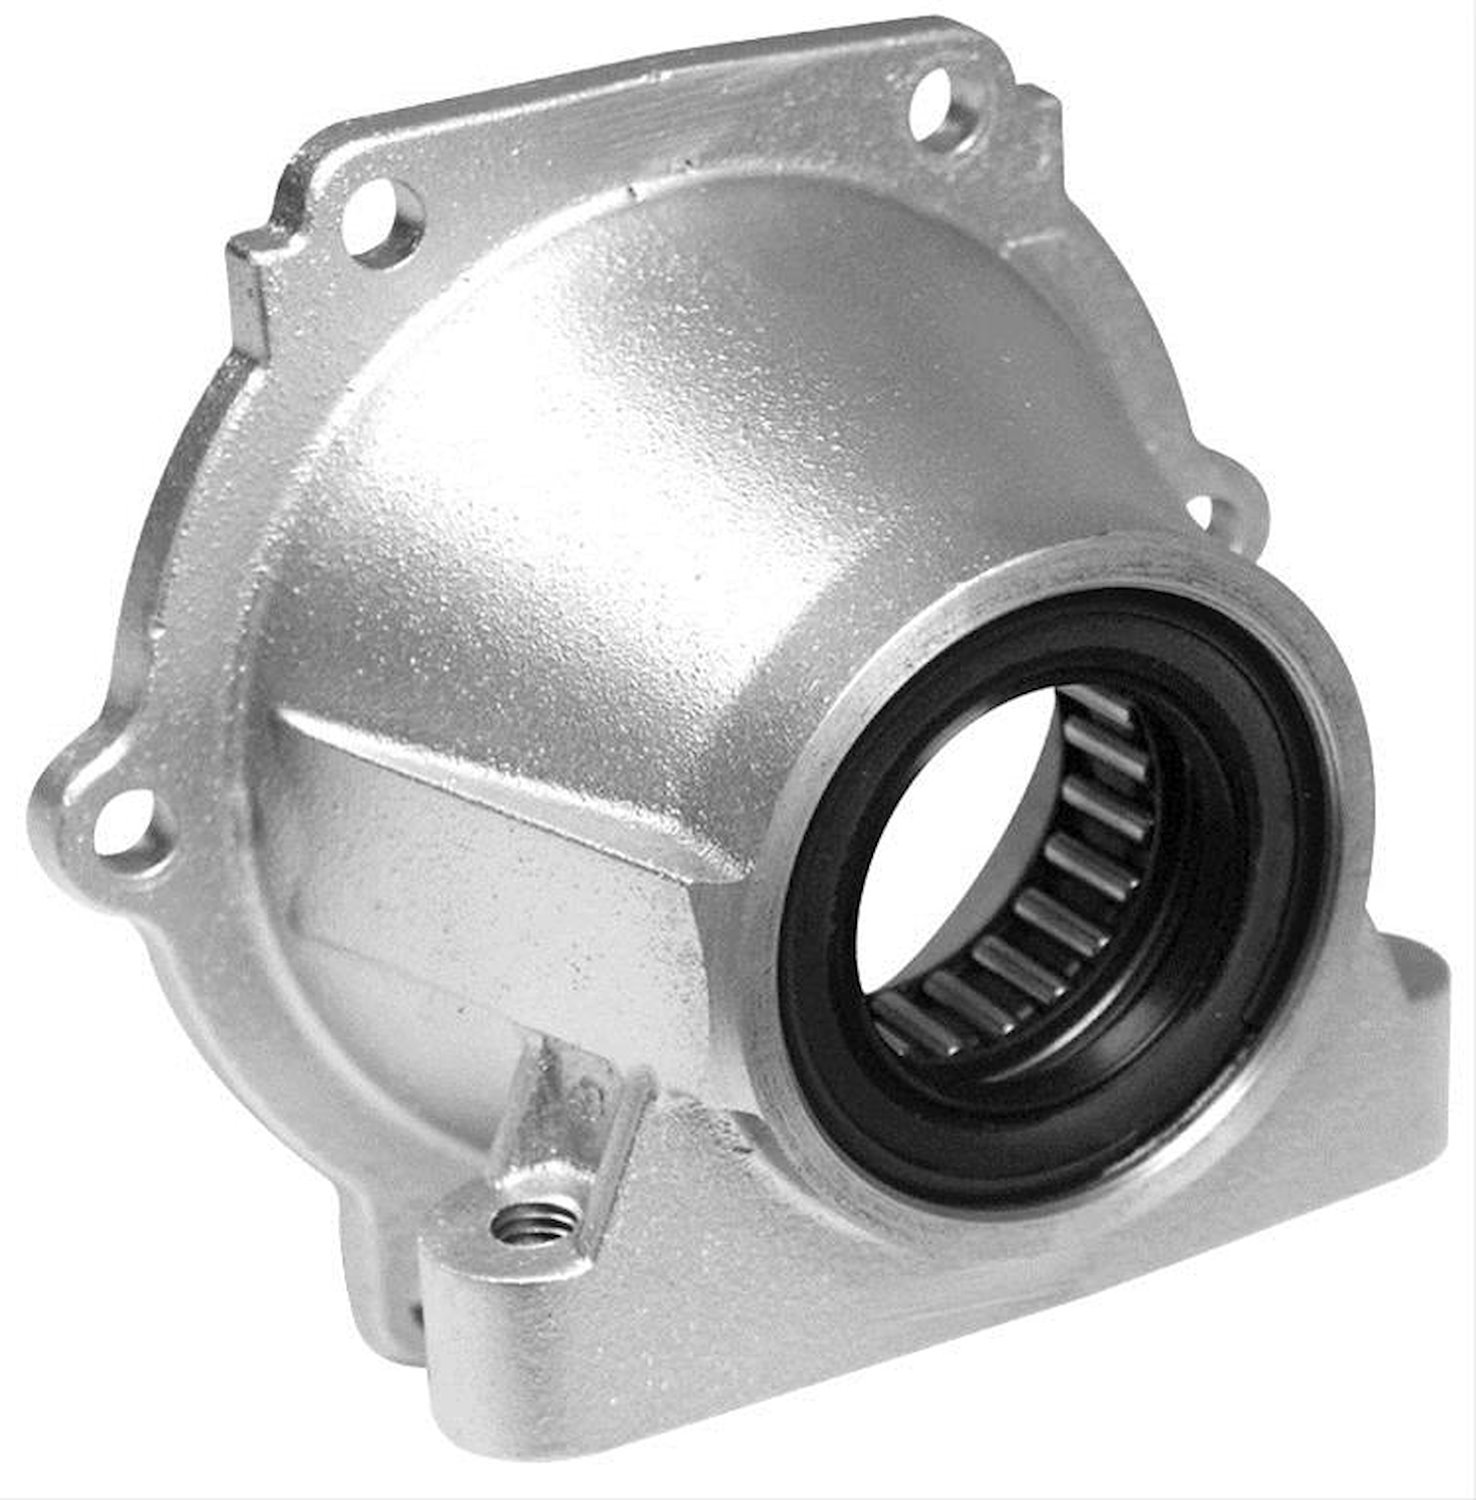 401936 Extension Housing, T400 Cast Tailhousing with Roller Bearing